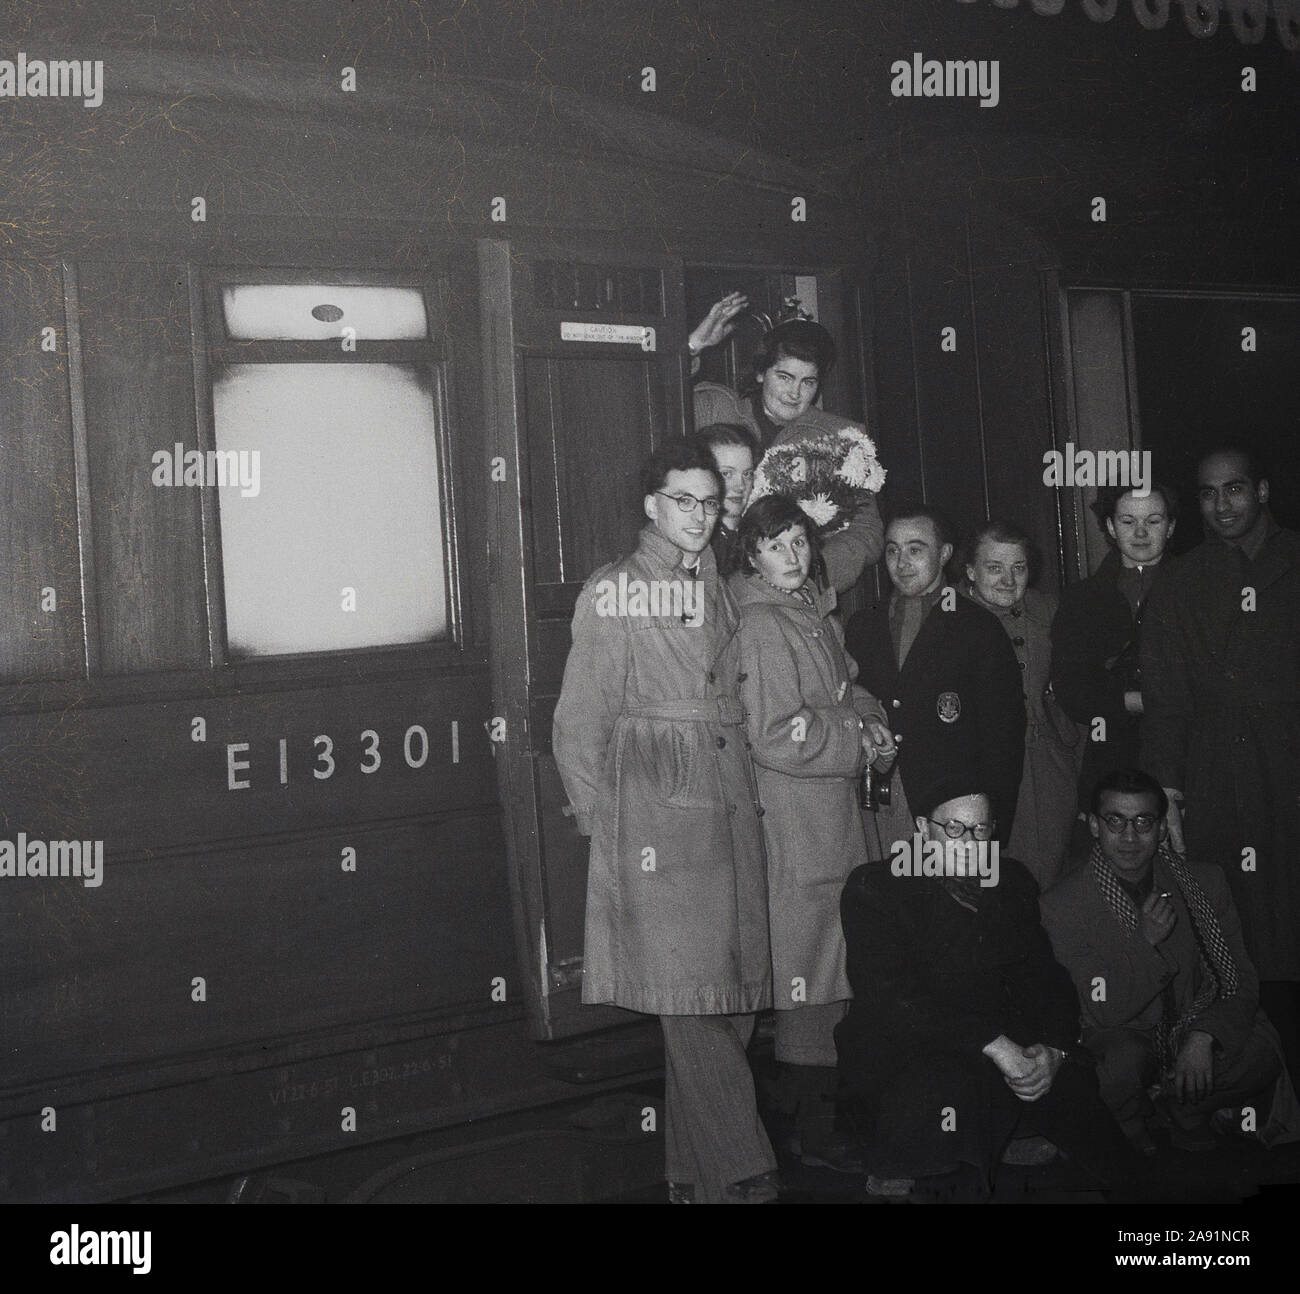 1950s, historical, group of people on a train platform, including those ...